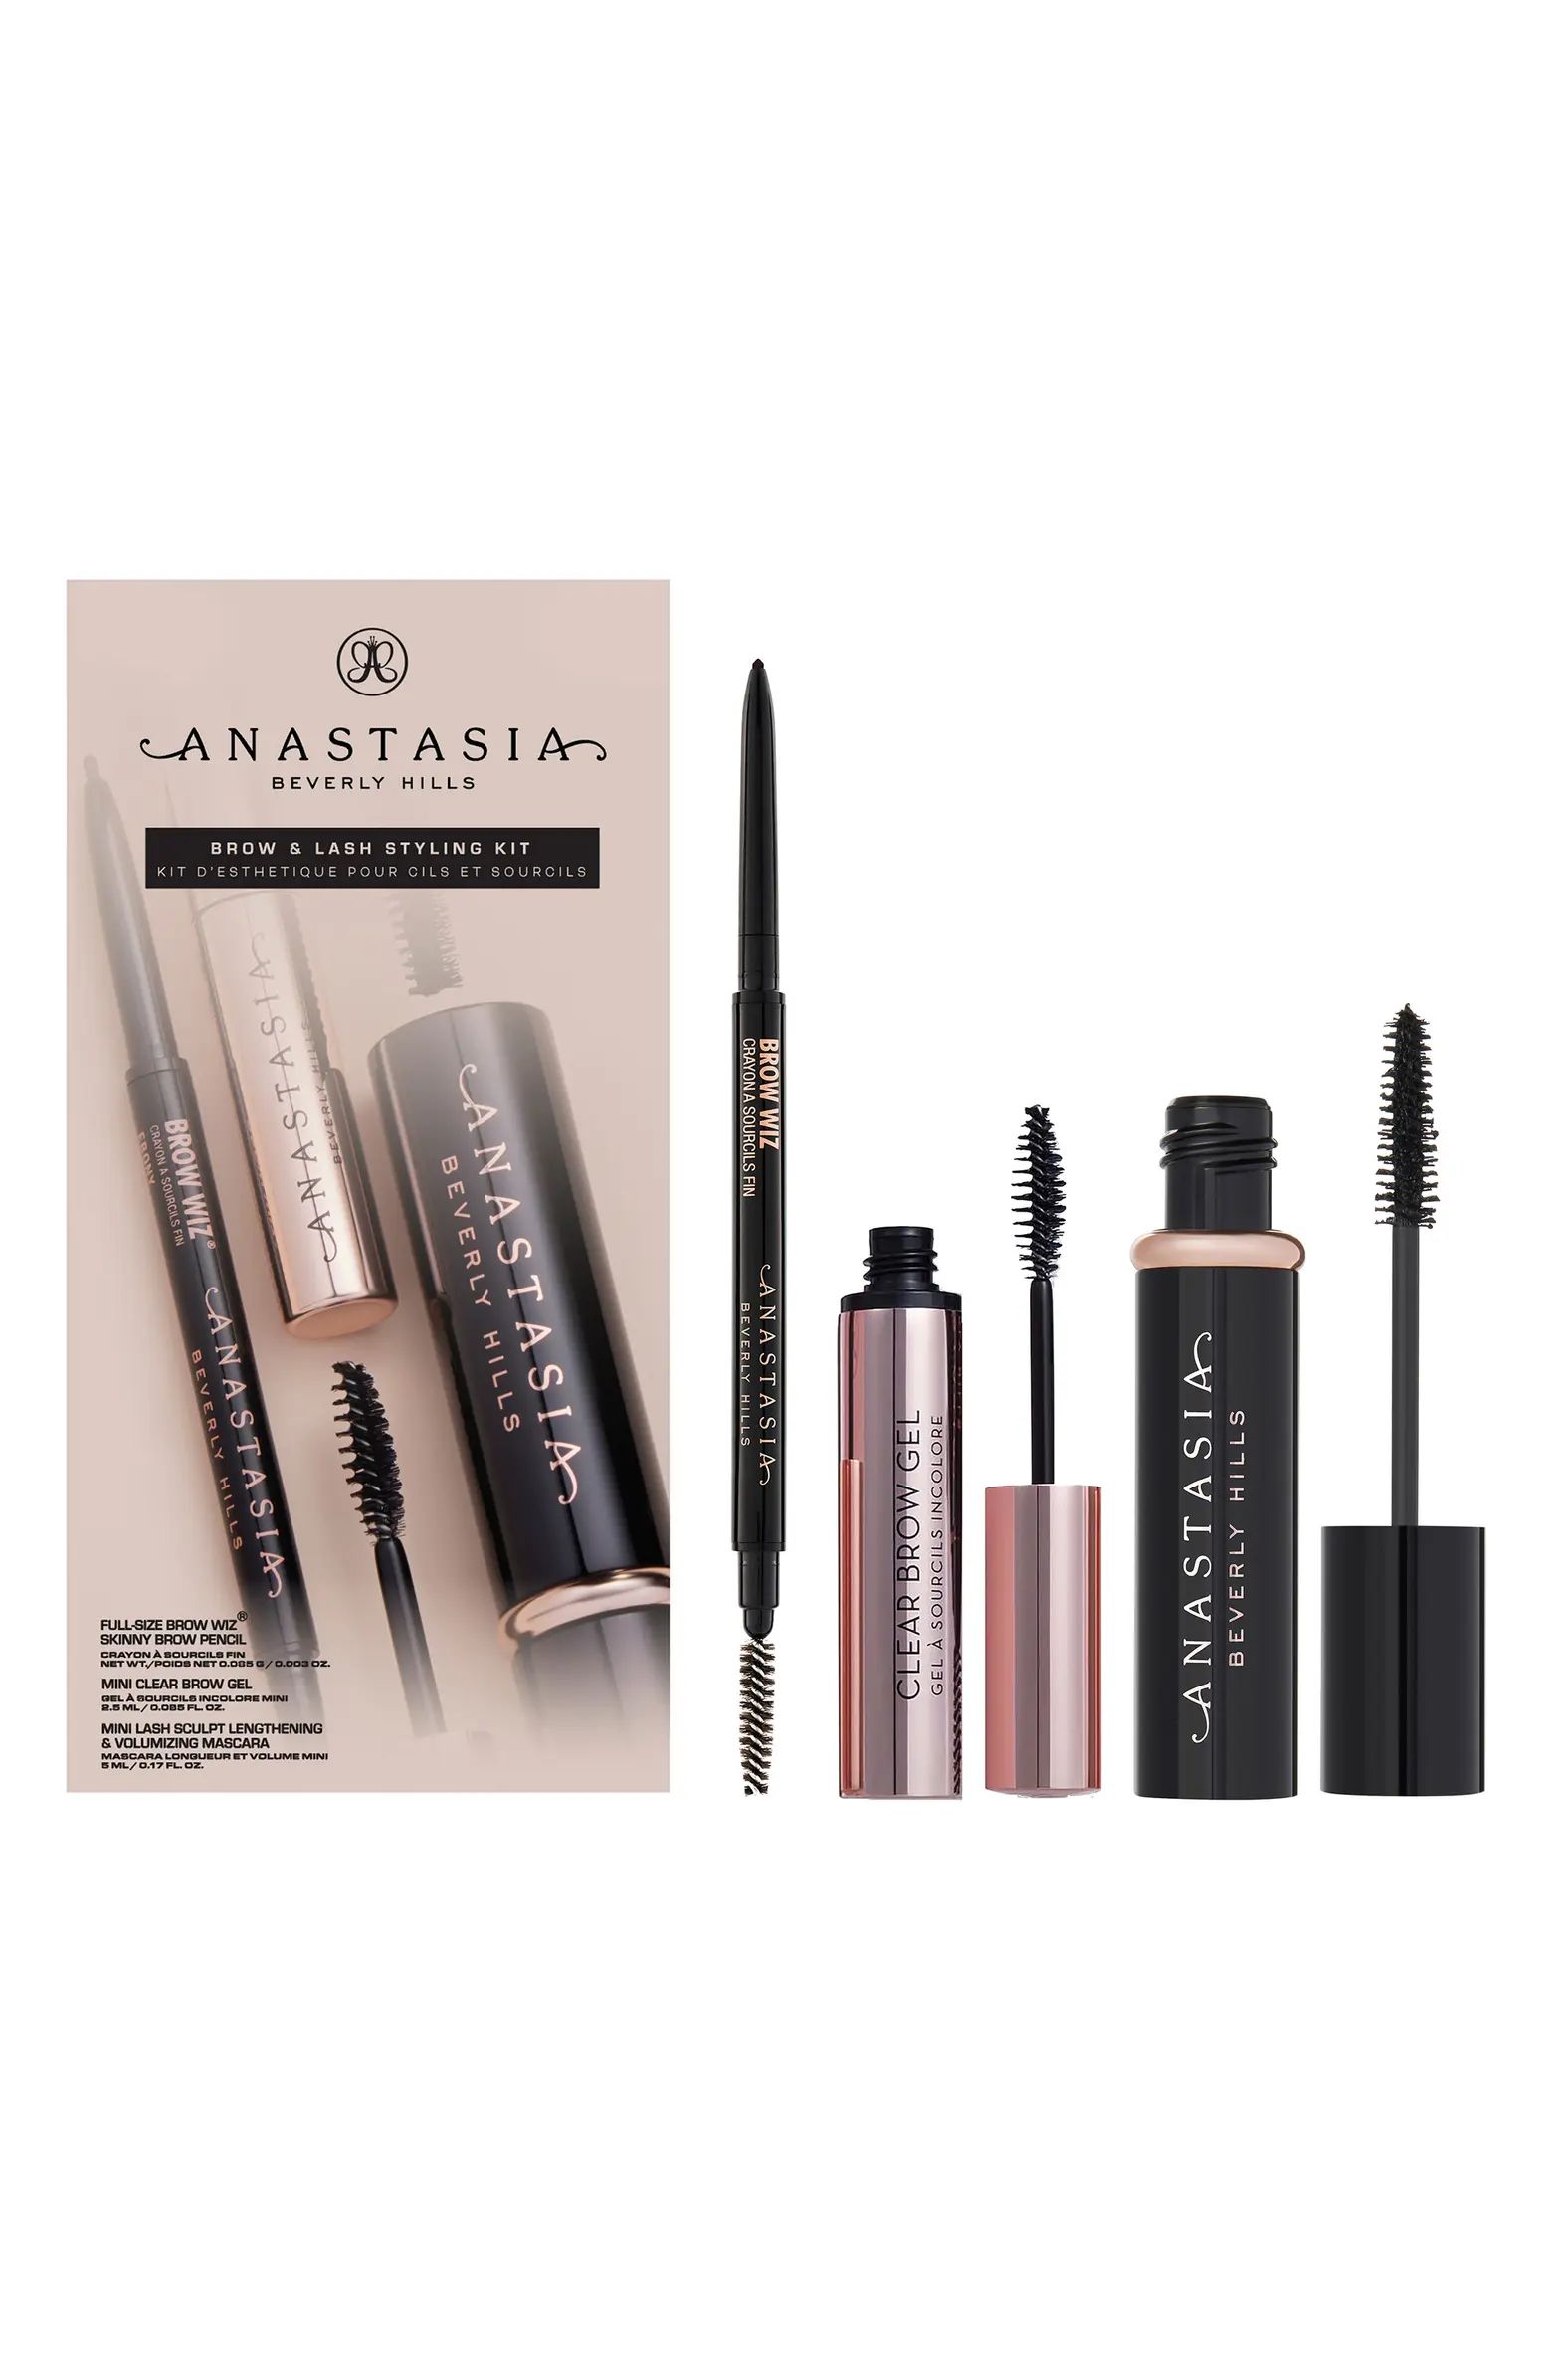 Brow & Lash Styling Kit $51 Value | Nordstrom